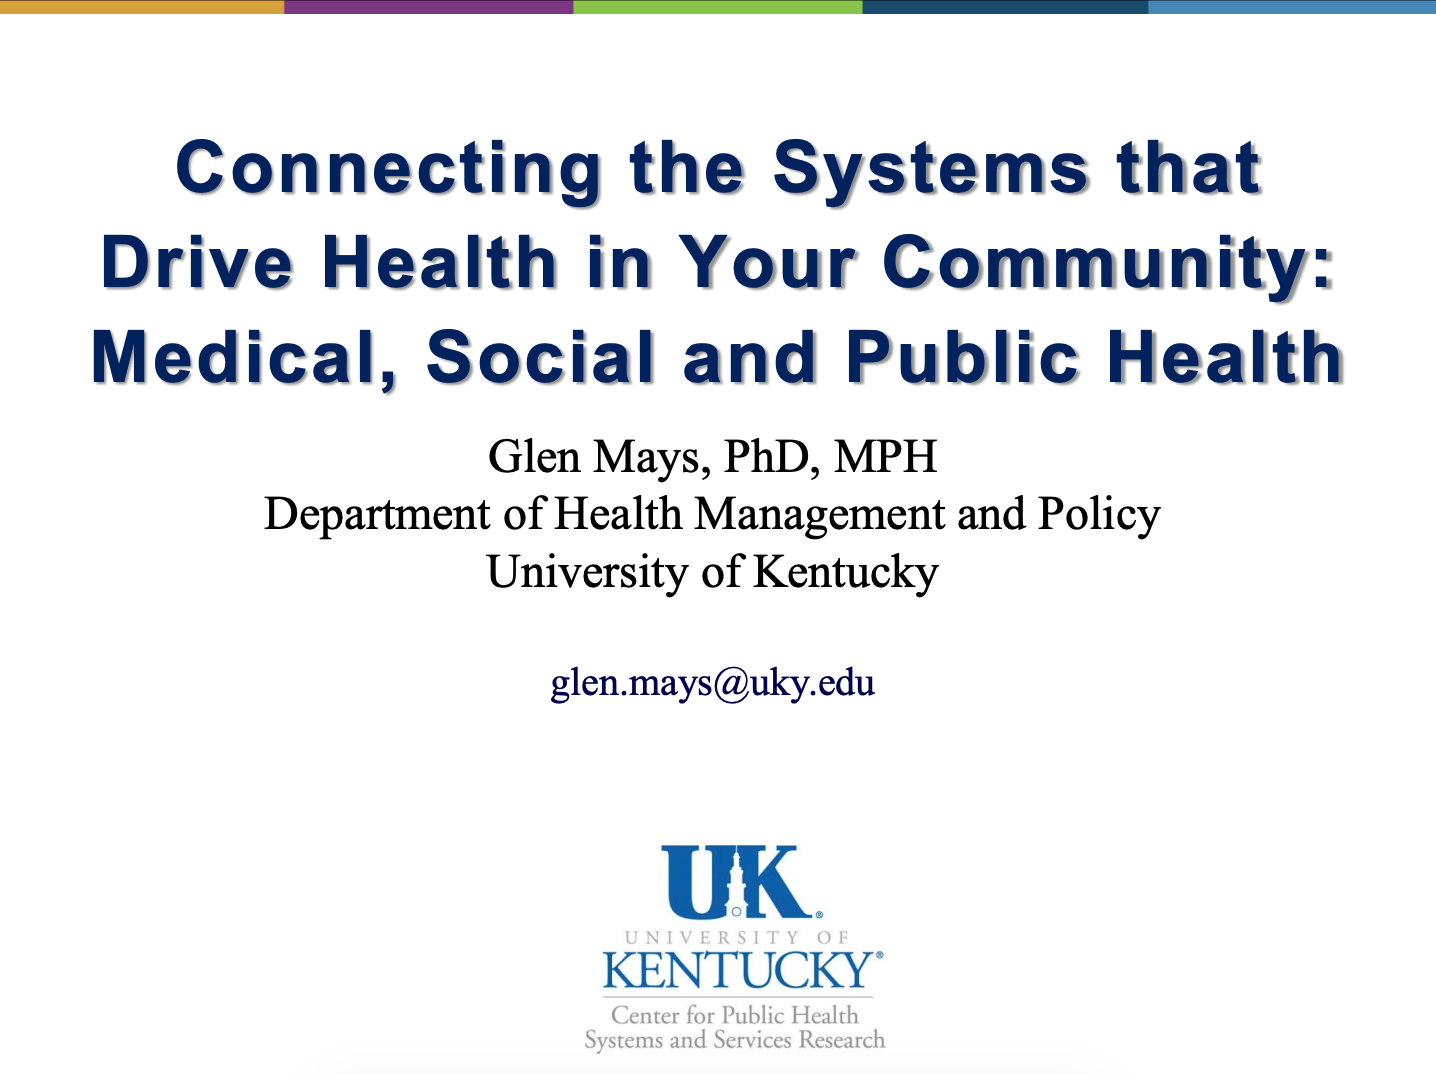 Connecting the Systems that Drive Health in Your Community: Medical, Social and Public Health